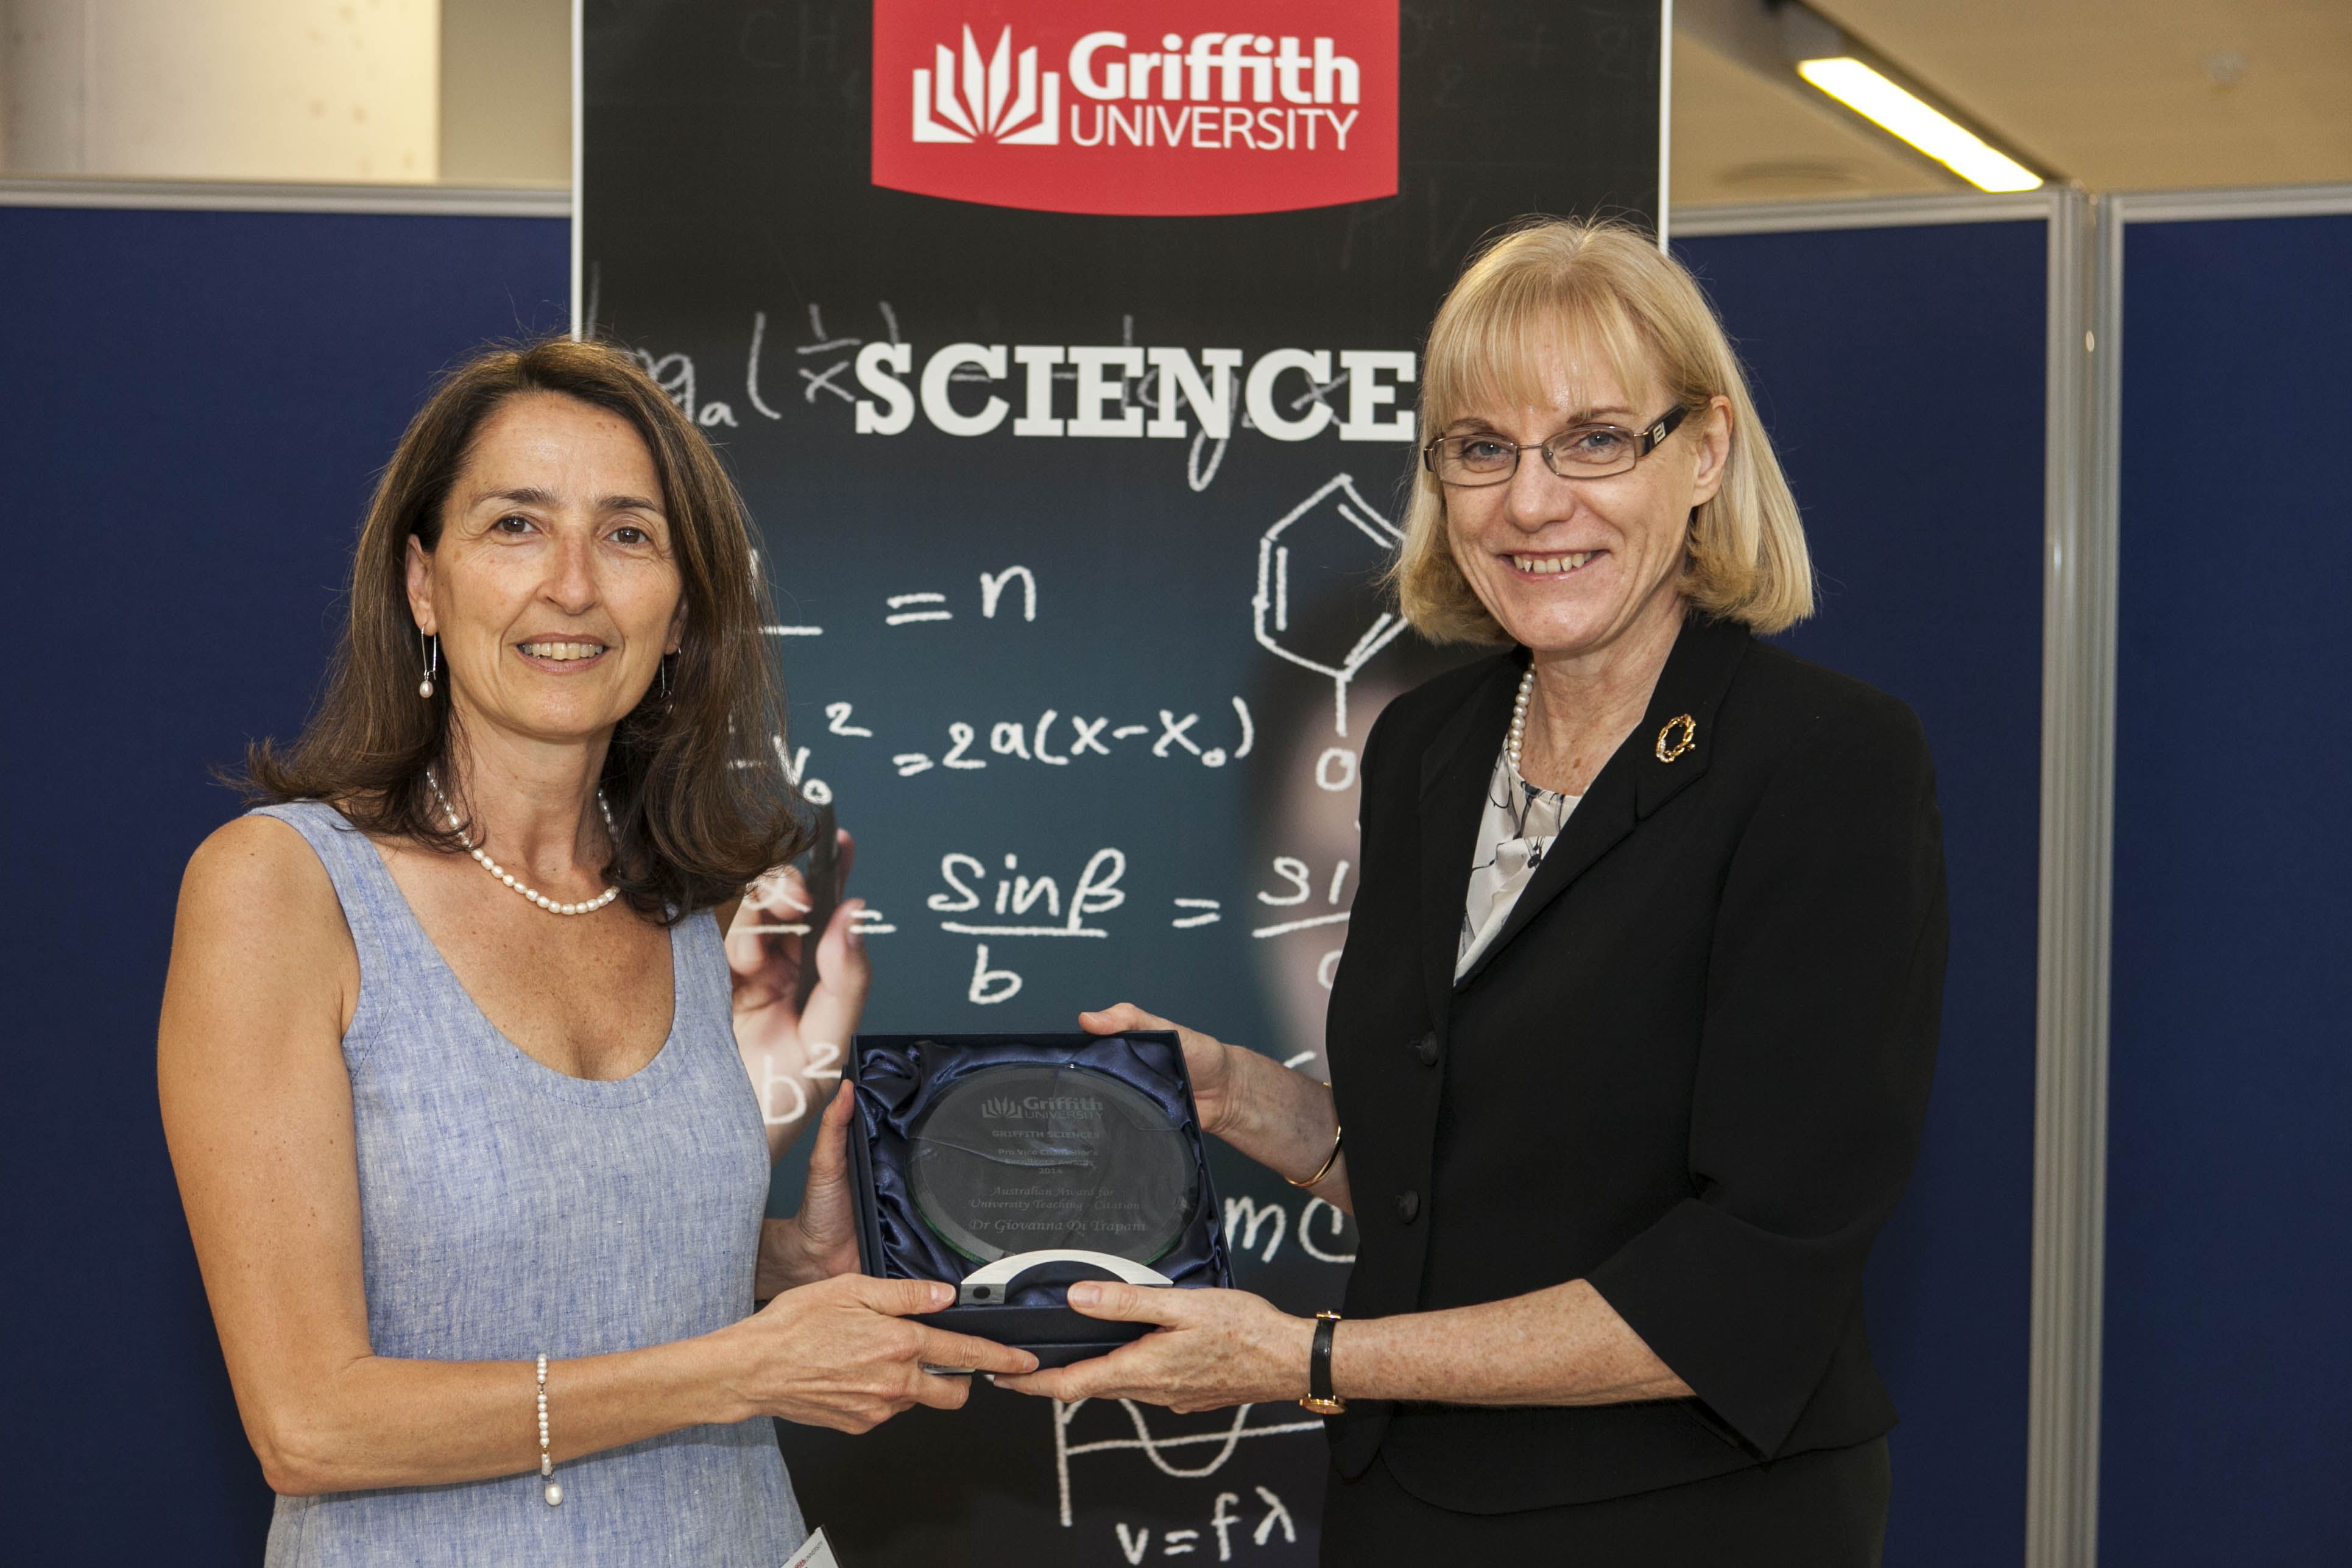 From left: Dr Giovanna Di Trapani (School of Natural Sciences) receives the Australian Award for University Teaching Citation from Pro Vice Chancellor Professor Debra Henly